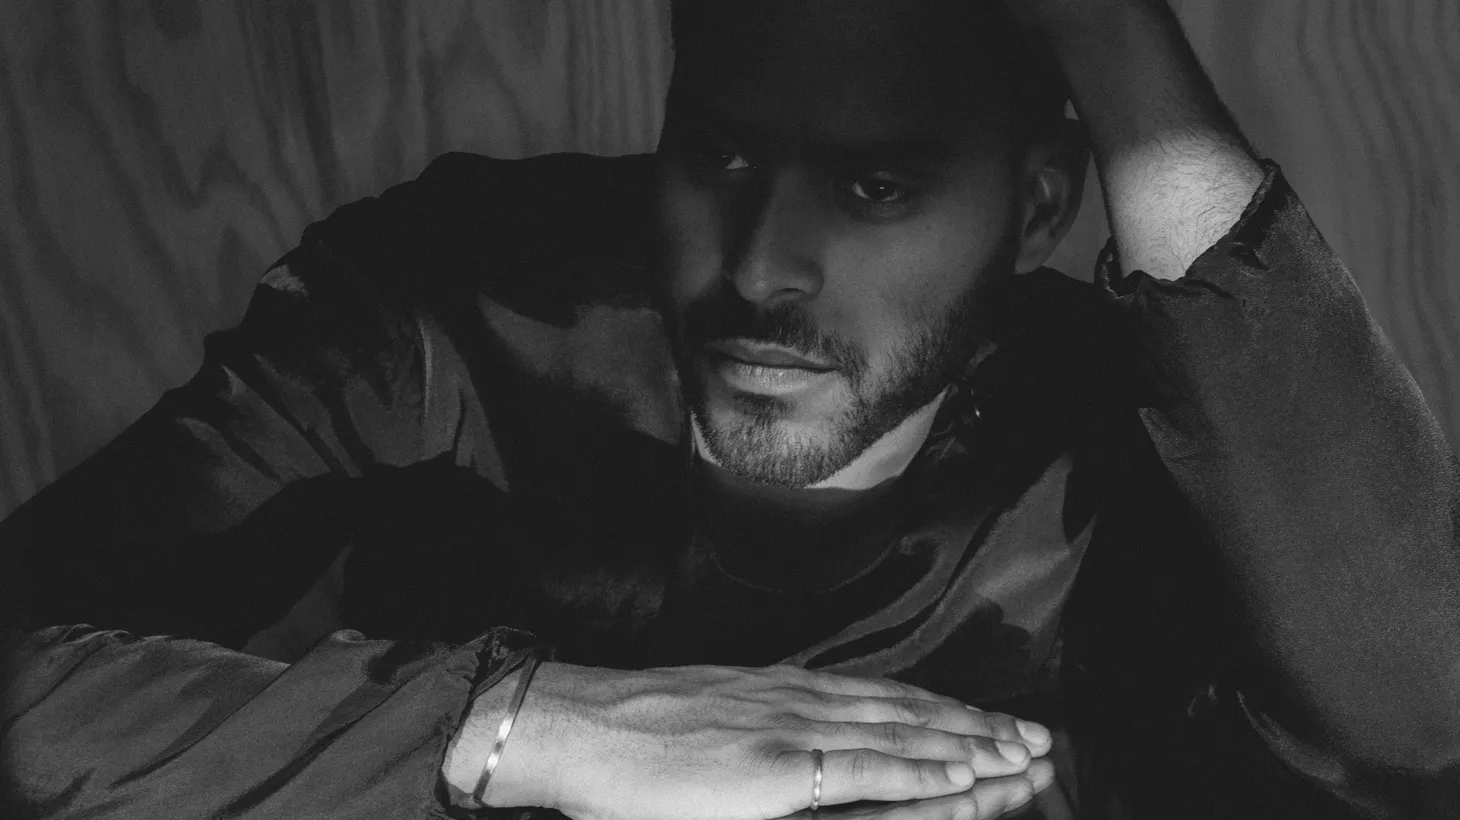 Brooklyn indie pop sensation Twin Shadow continues to examine life through revved up guitars, darker ballads, and moody New Wave tracks. The first stop on his upcoming tour will be a live set on Morning Becomes Eclectic at 11:15am.